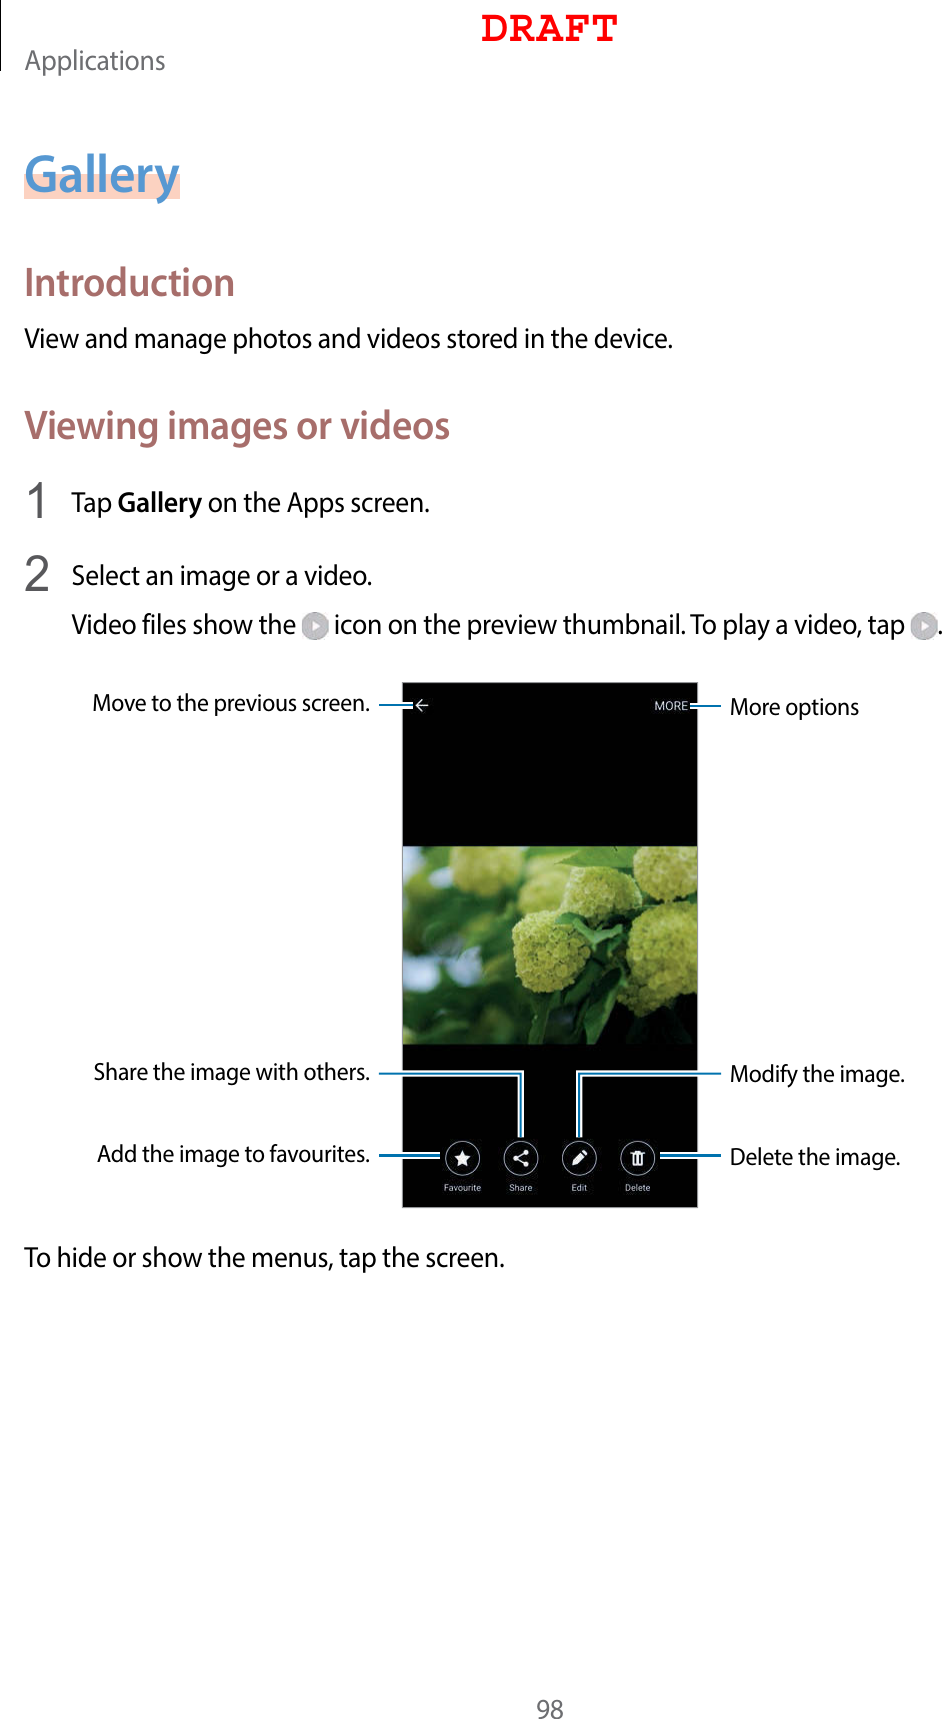 Applications98GalleryIntroductionView and manage photos and videos stored in the device.Viewing images or videos1  Tap Gallery on the Apps screen.2  Select an image or a video.Video files show the   icon on the preview thumbnail. To play a video, tap  .More optionsMove to the previous screen.Add the image to favourites.Share the image with others.Delete the image.Modify the image.To hide or show the menus, tap the screen.DRAFT